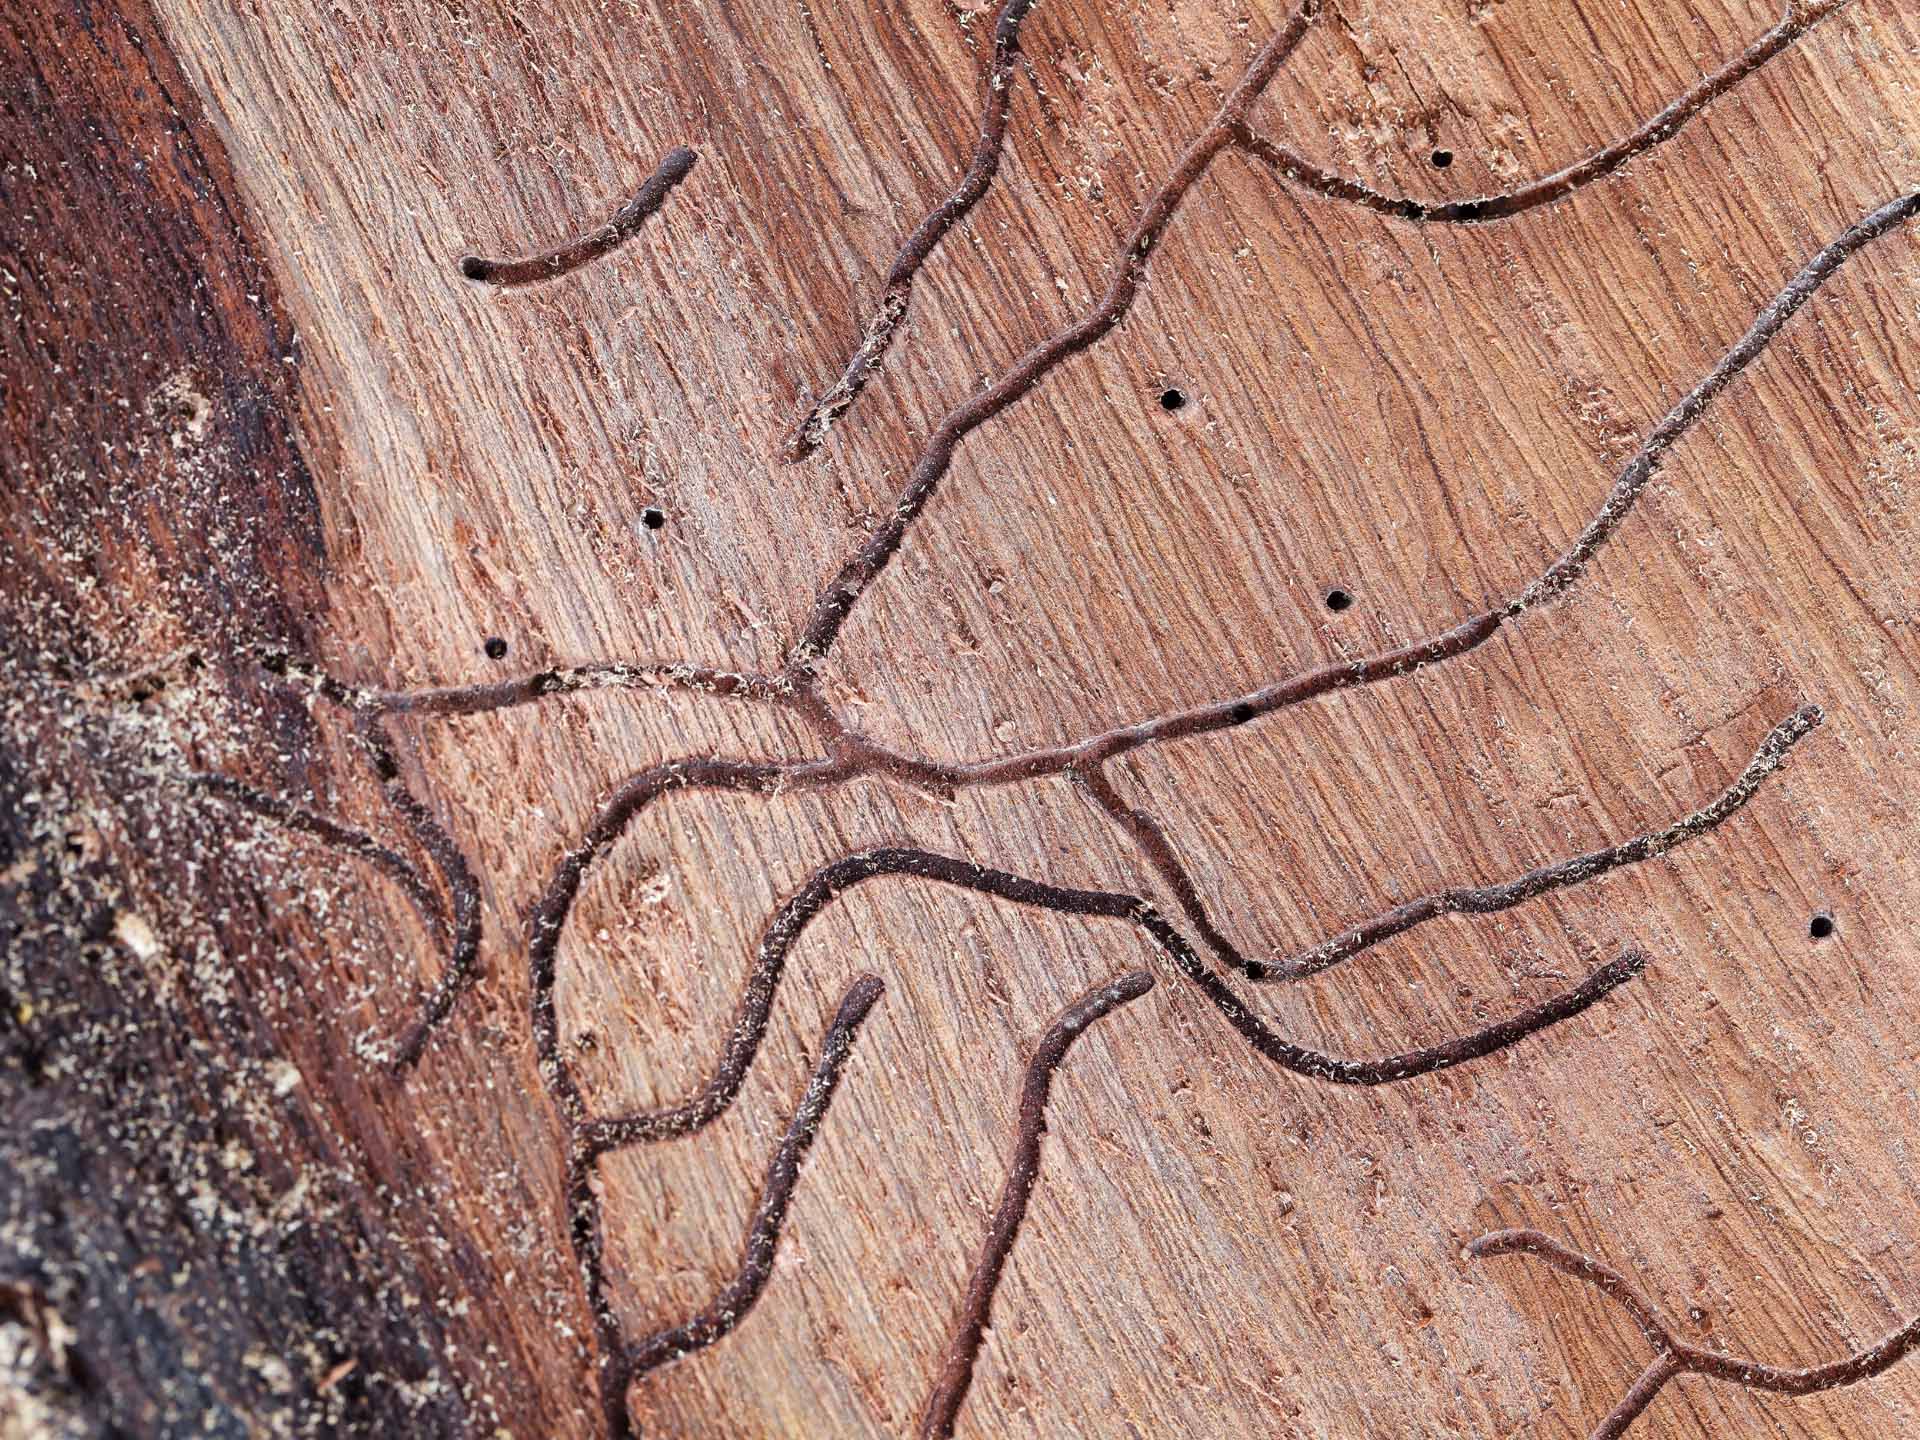 Be on the lookout for termites, homeowners warned